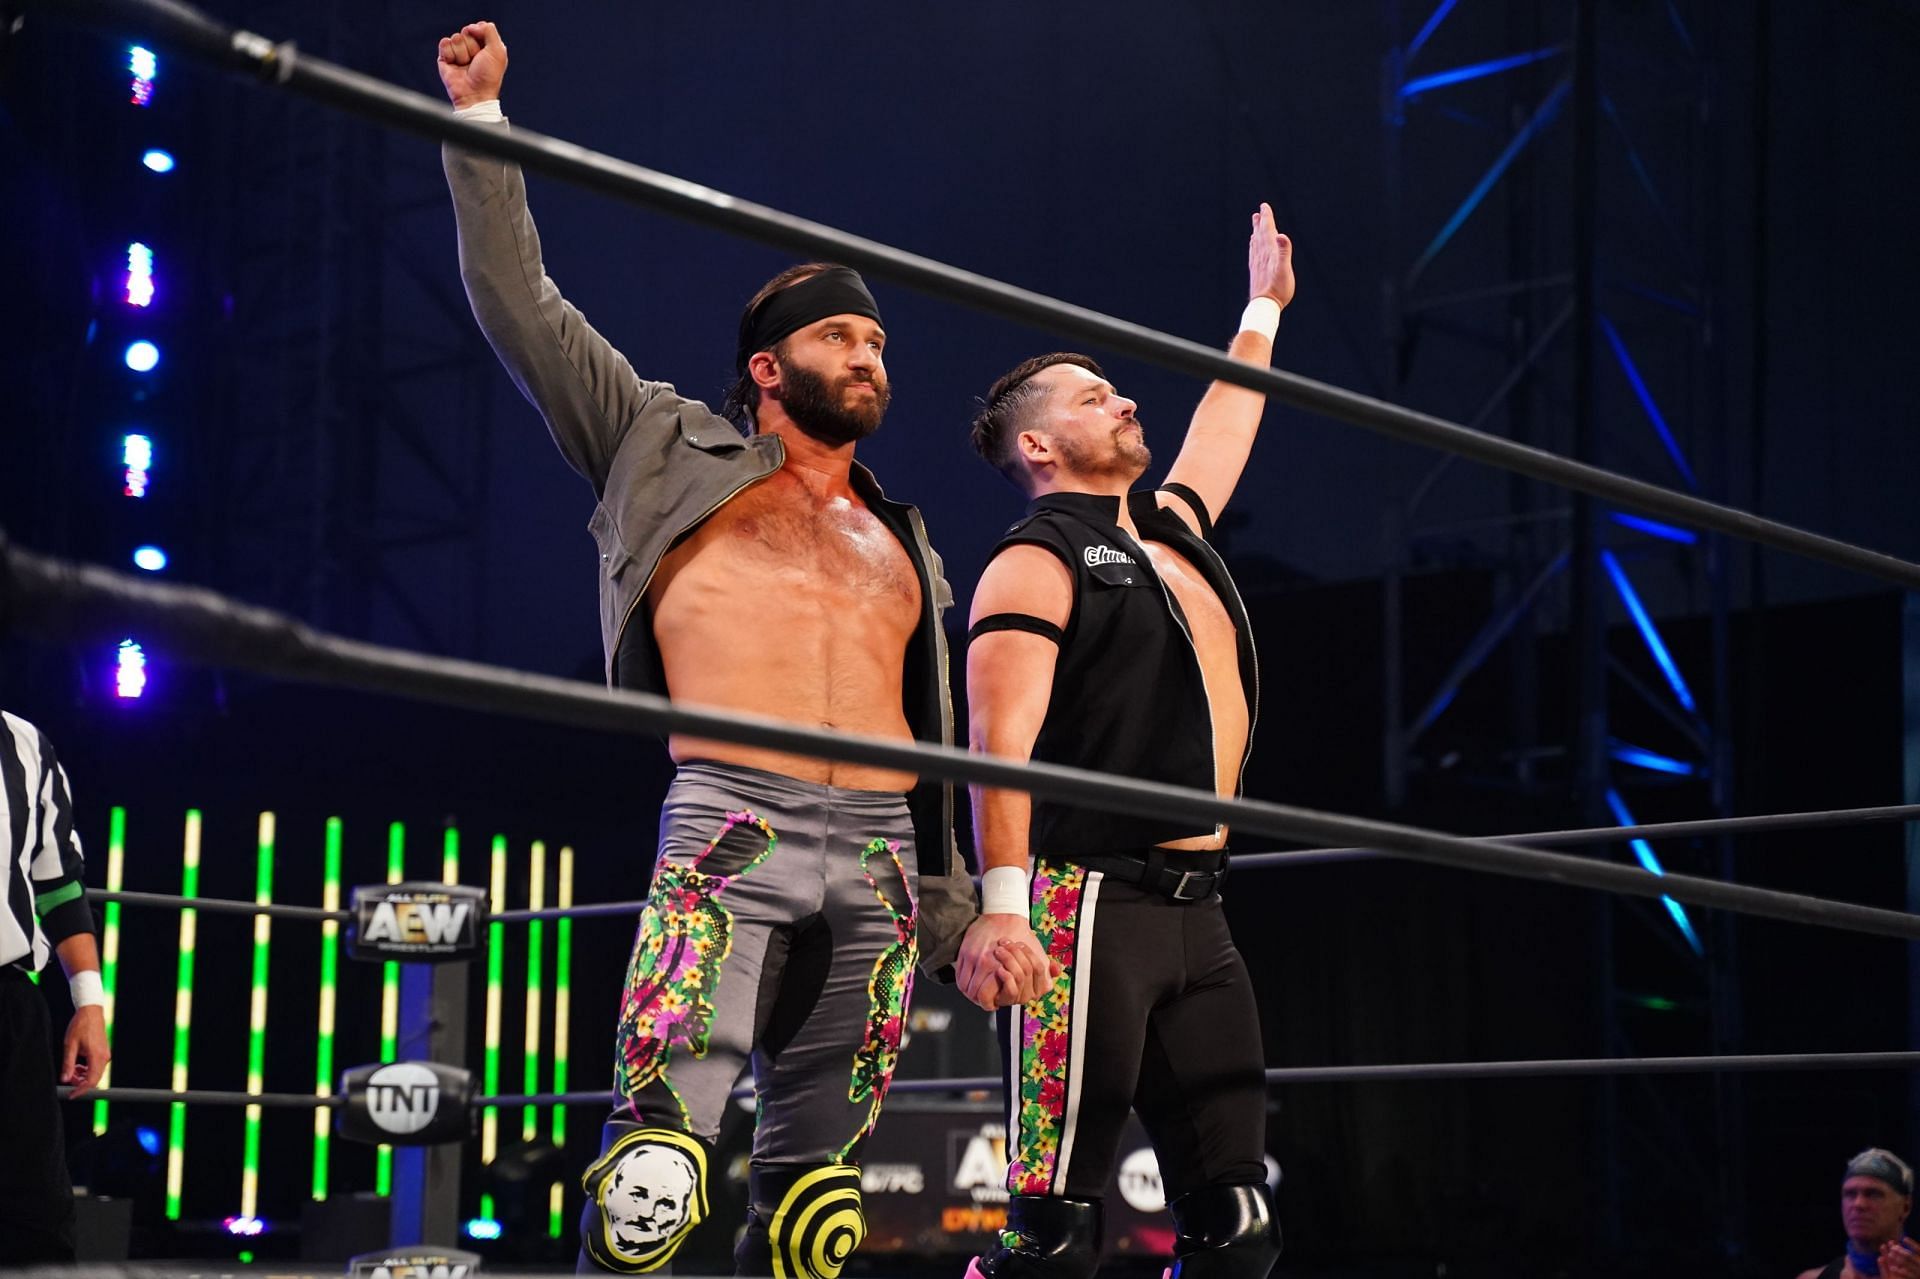 The Best Friends has been part of AEW since its inception.